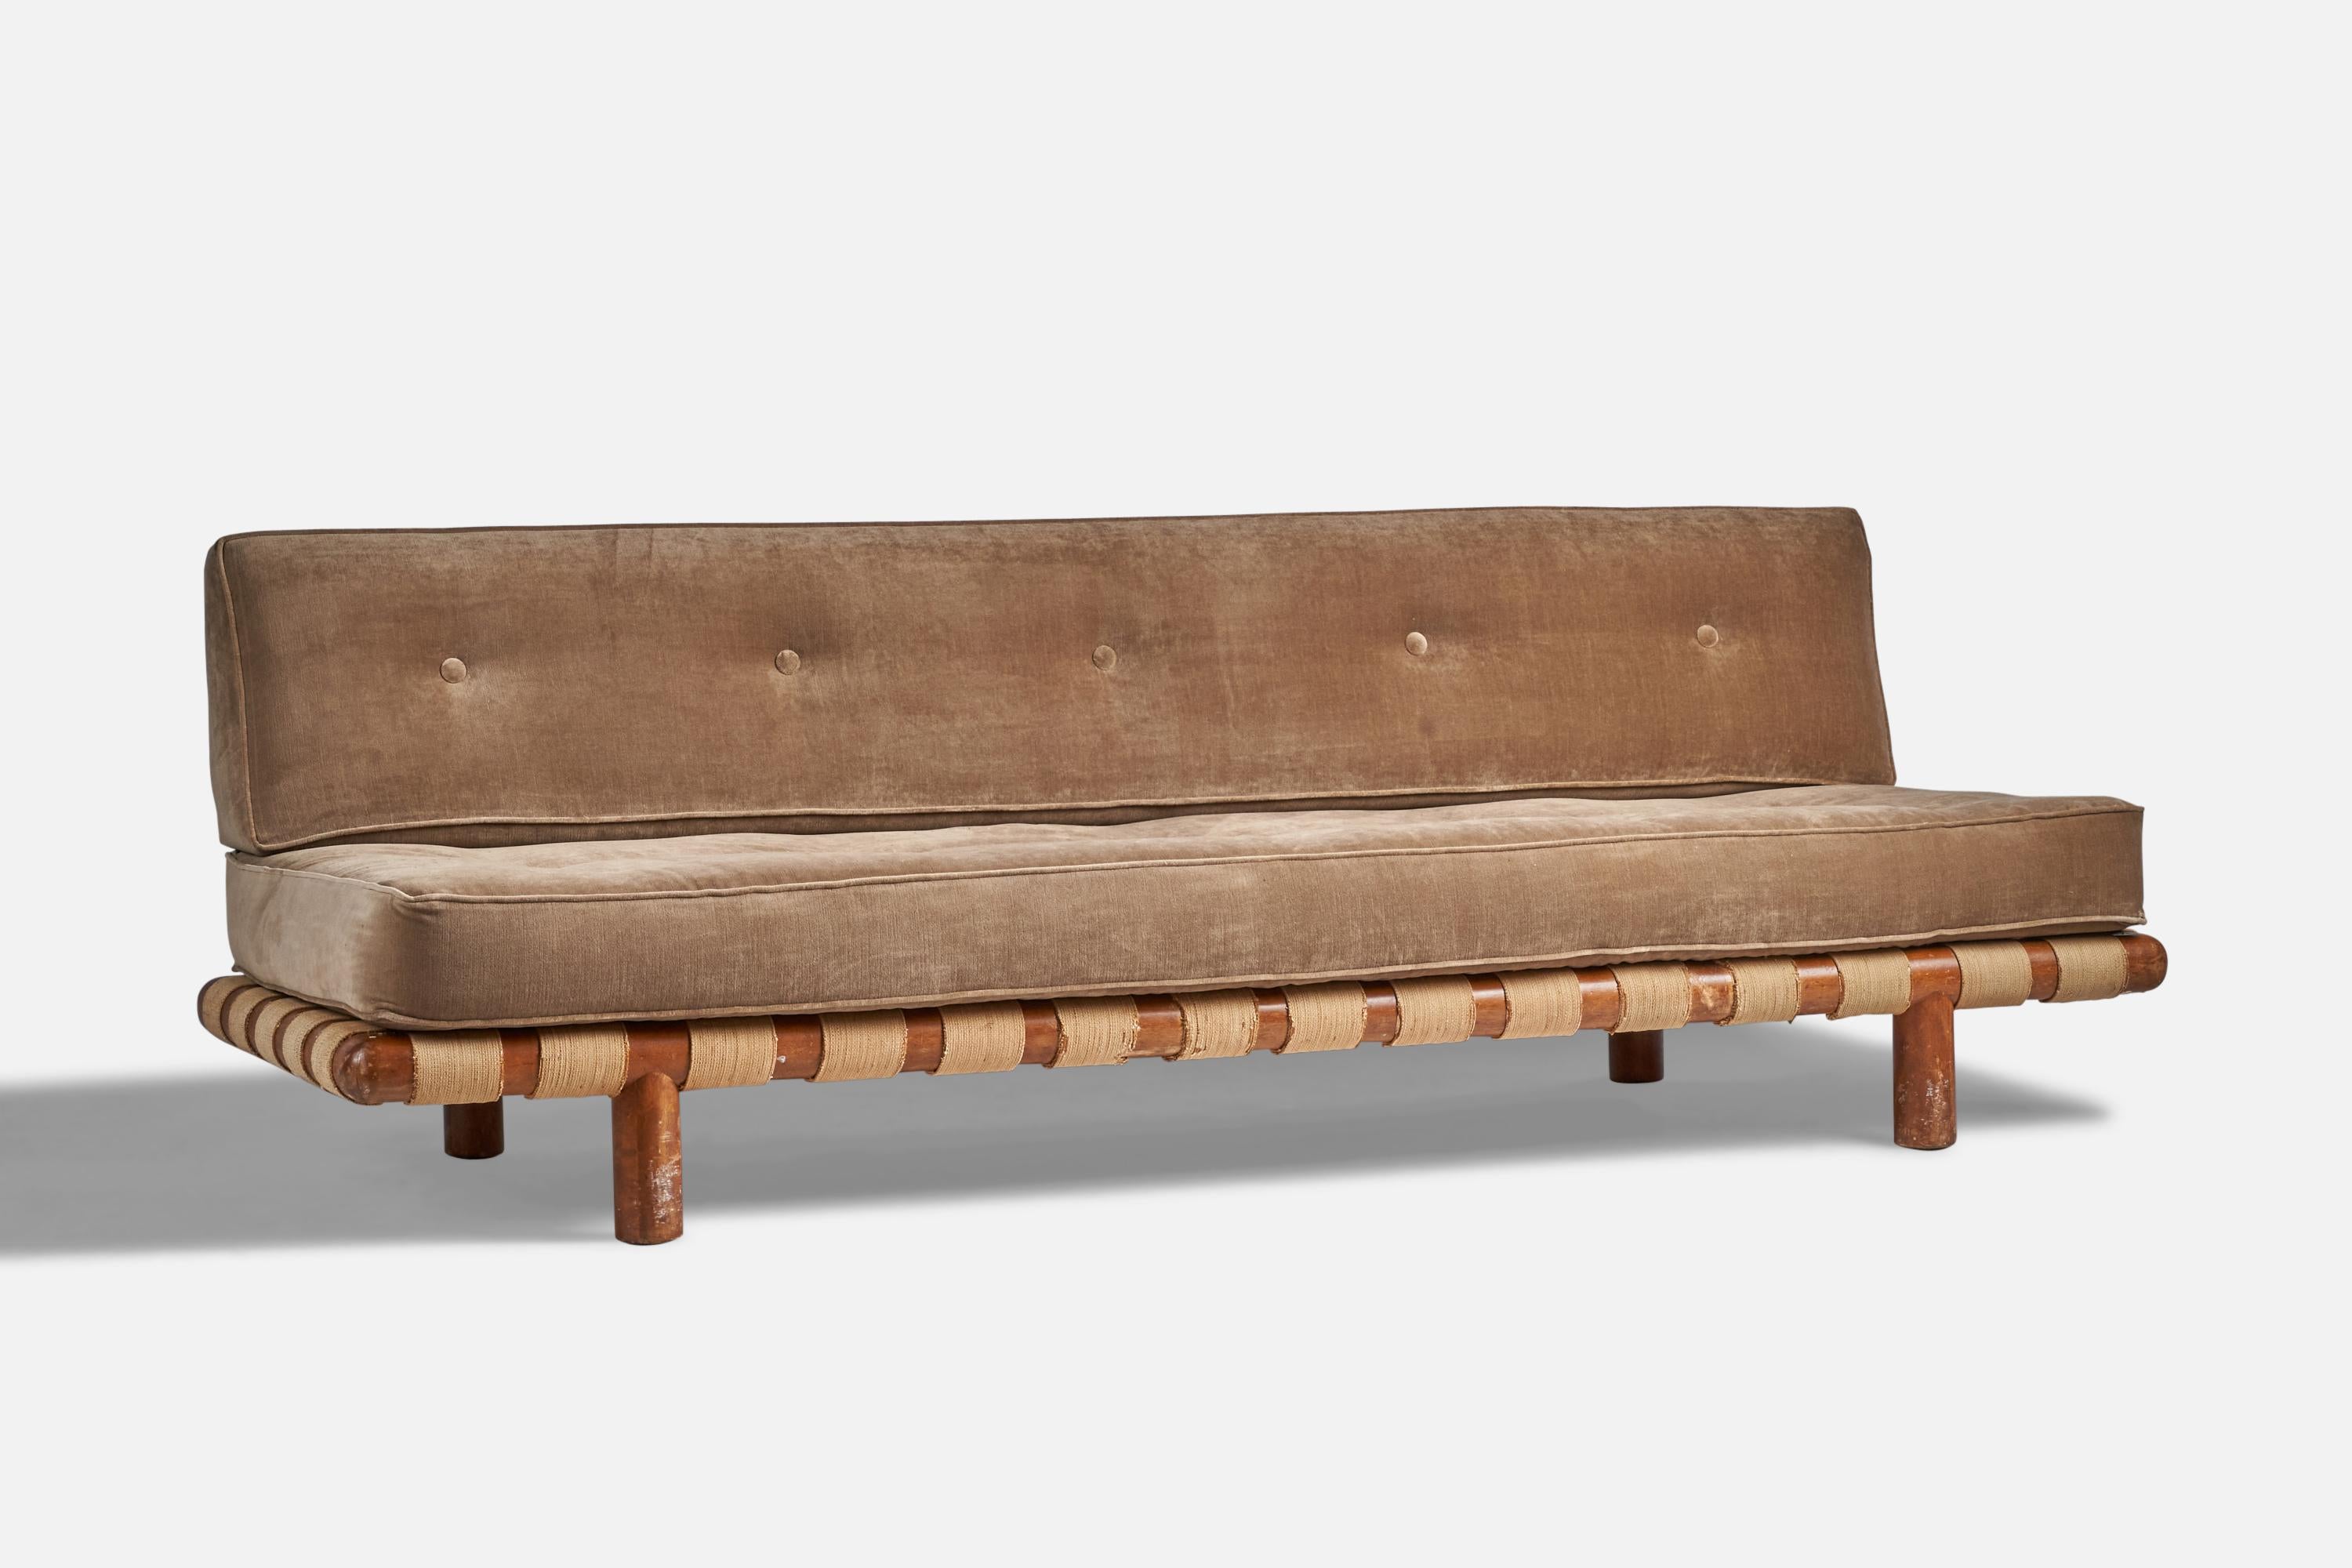 A walnut, beige canvas webbing and brown velvet sofa designed by T.H. Robsjohn-Gibbings and produced by Widdicomb Furniture Company, Grand Rapids, Michigan, USA, 1950s.

16” seat height
